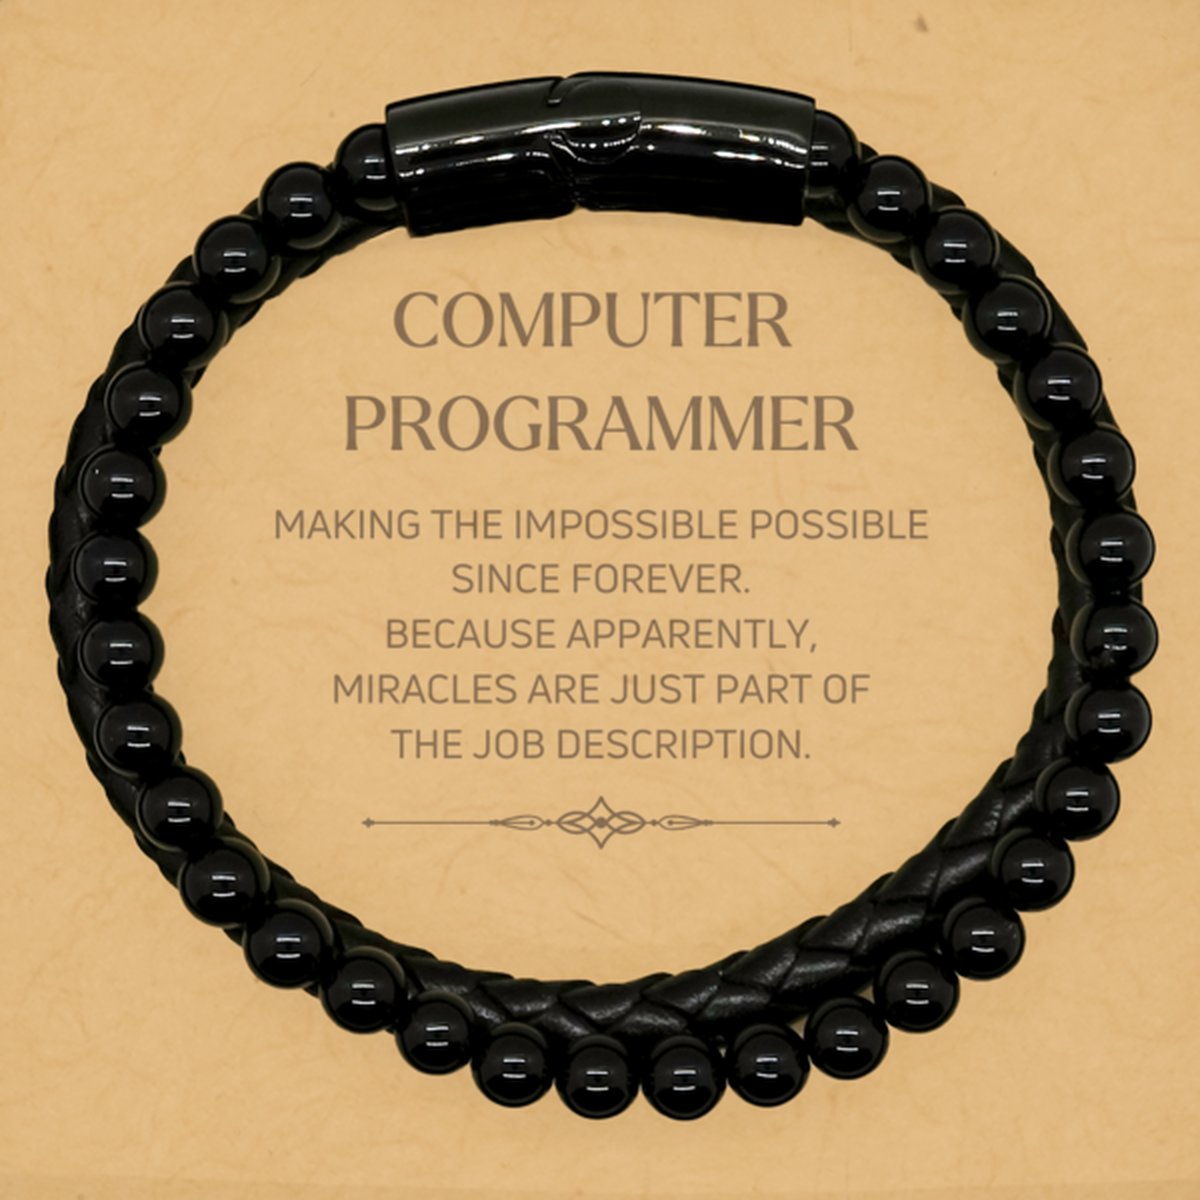 Funny Computer Programmer Gifts, Miracles are just part of the job description, Inspirational Birthday Stone Leather Bracelets For Computer Programmer, Men, Women, Coworkers, Friends, Boss